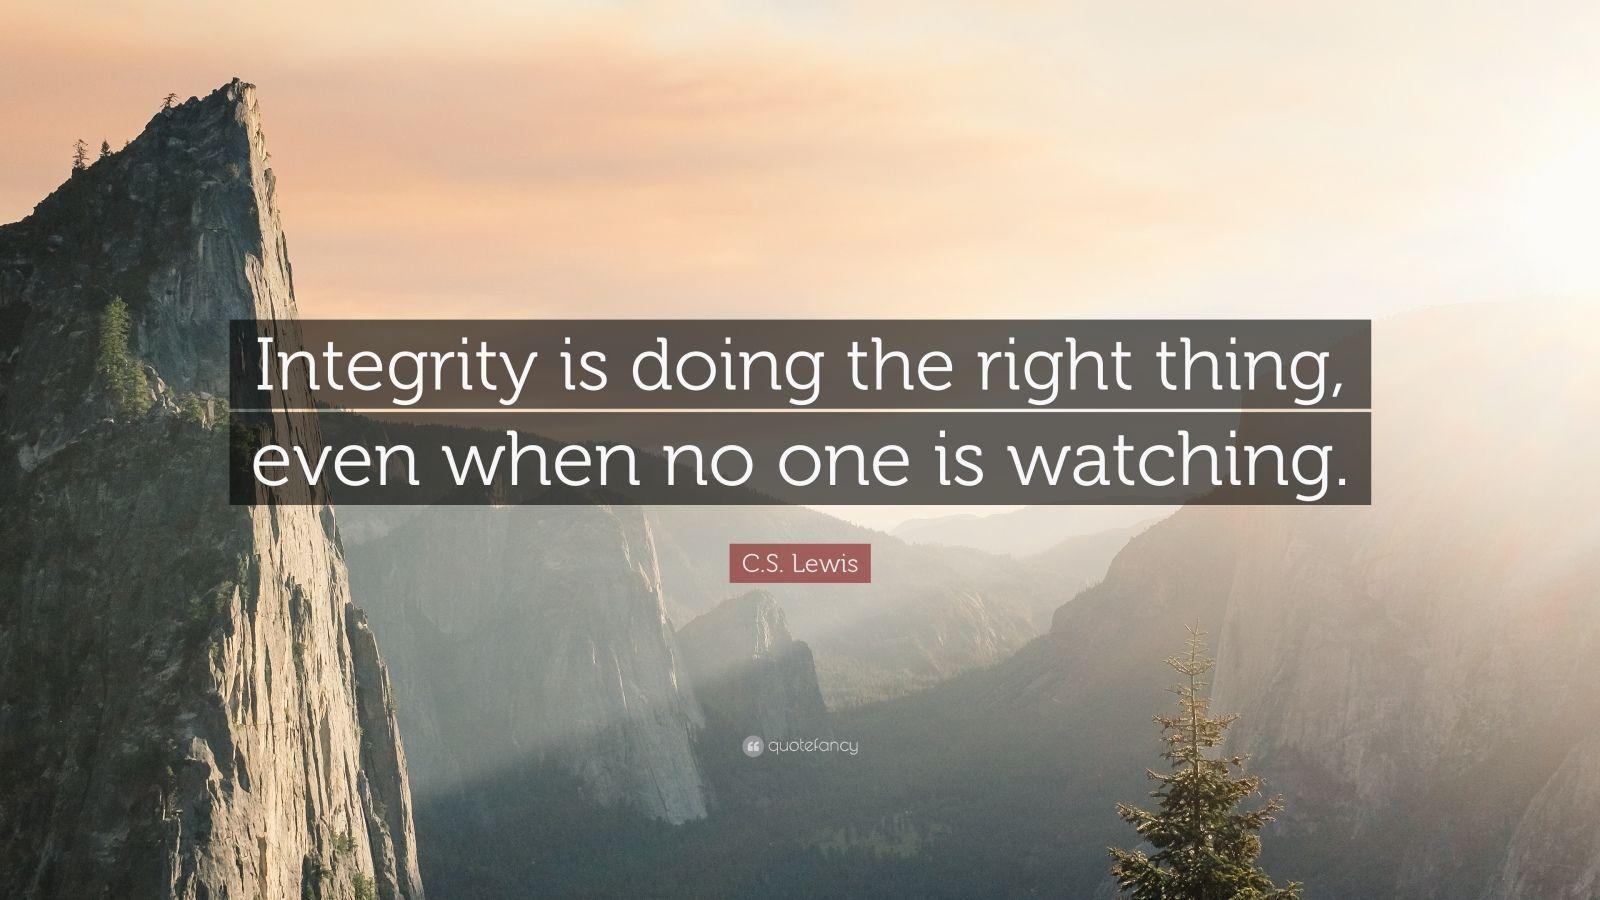 C. S. Lewis Quote: “Integrity is doing the right thing, even when no